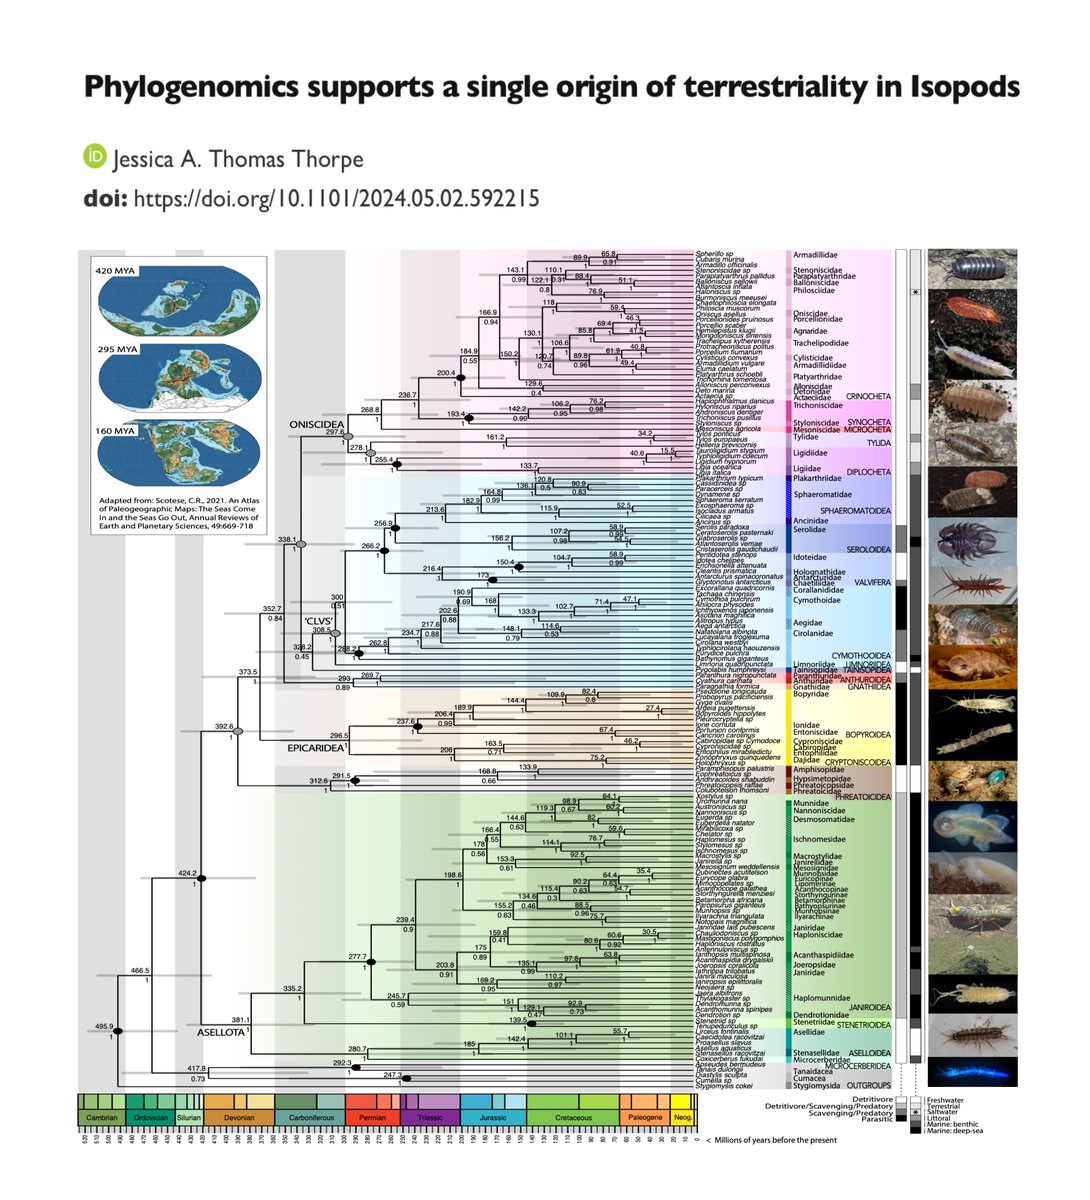 New preprint!  Phylogenomics supports a single origin of terrestriality in isopods. 
biorxiv.org/content/10.110…